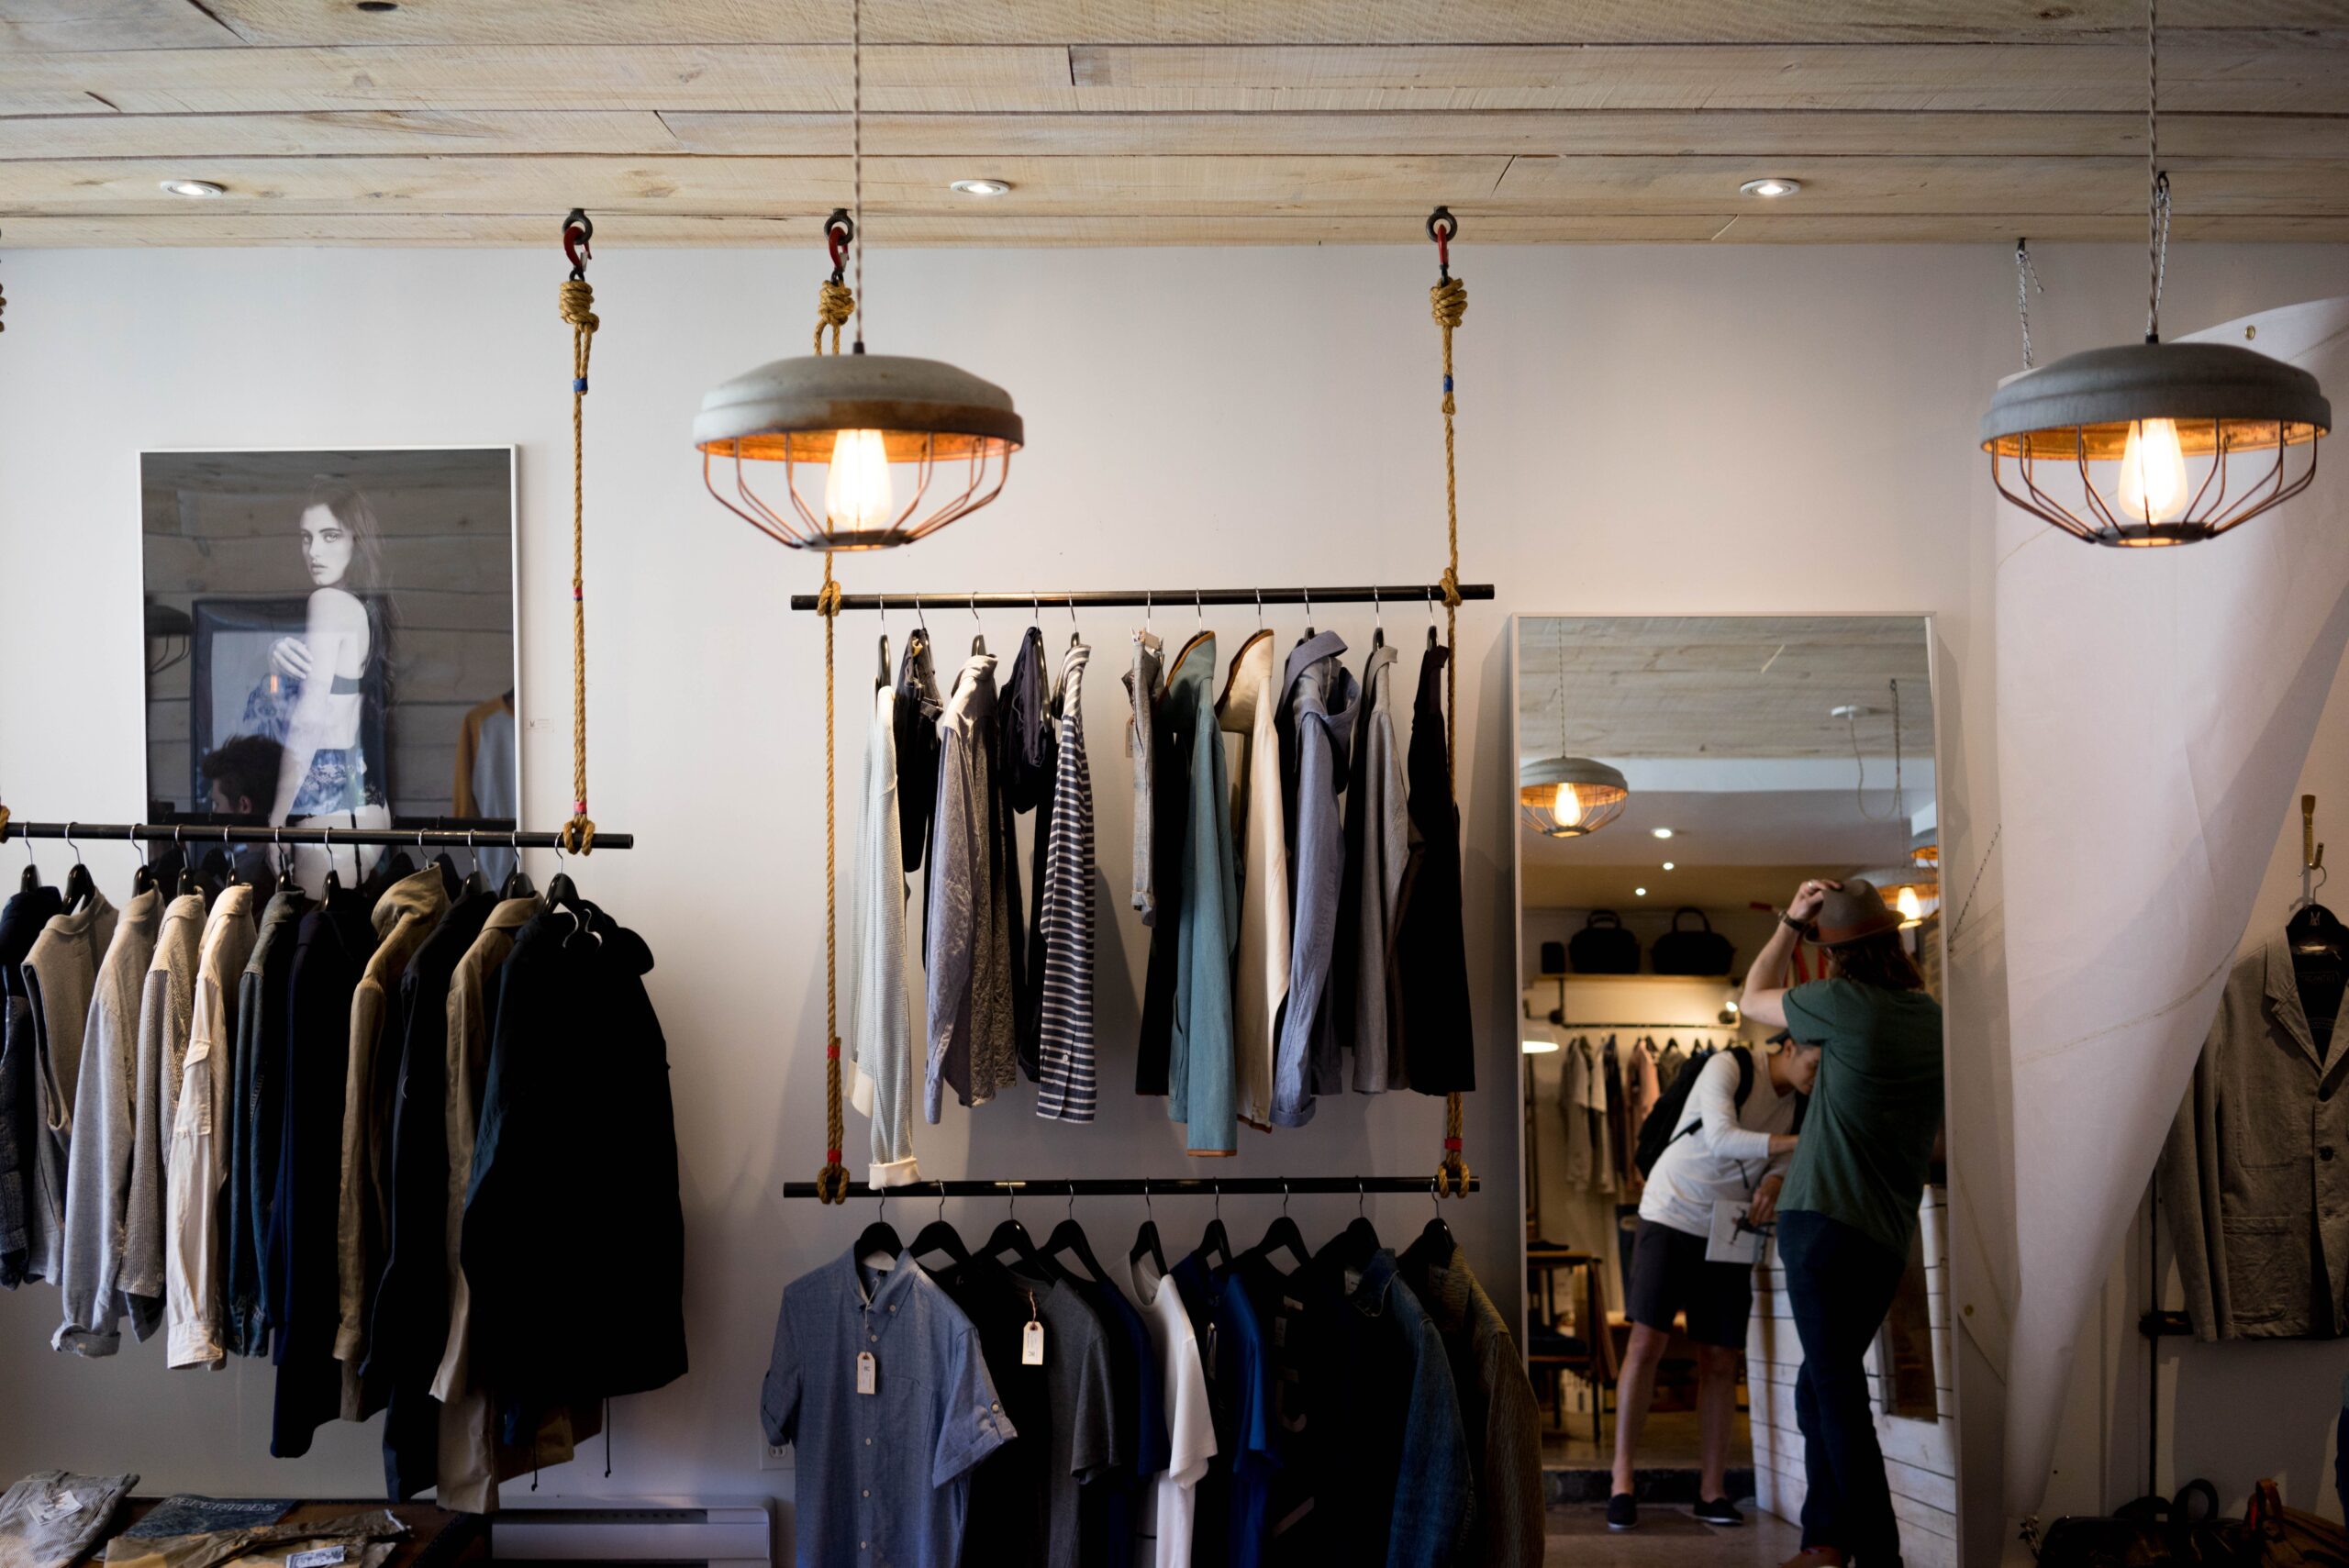 Mindful Fashion Shopping: How to Avoid Impulse Buys and Build a Sustainable Wardrobe